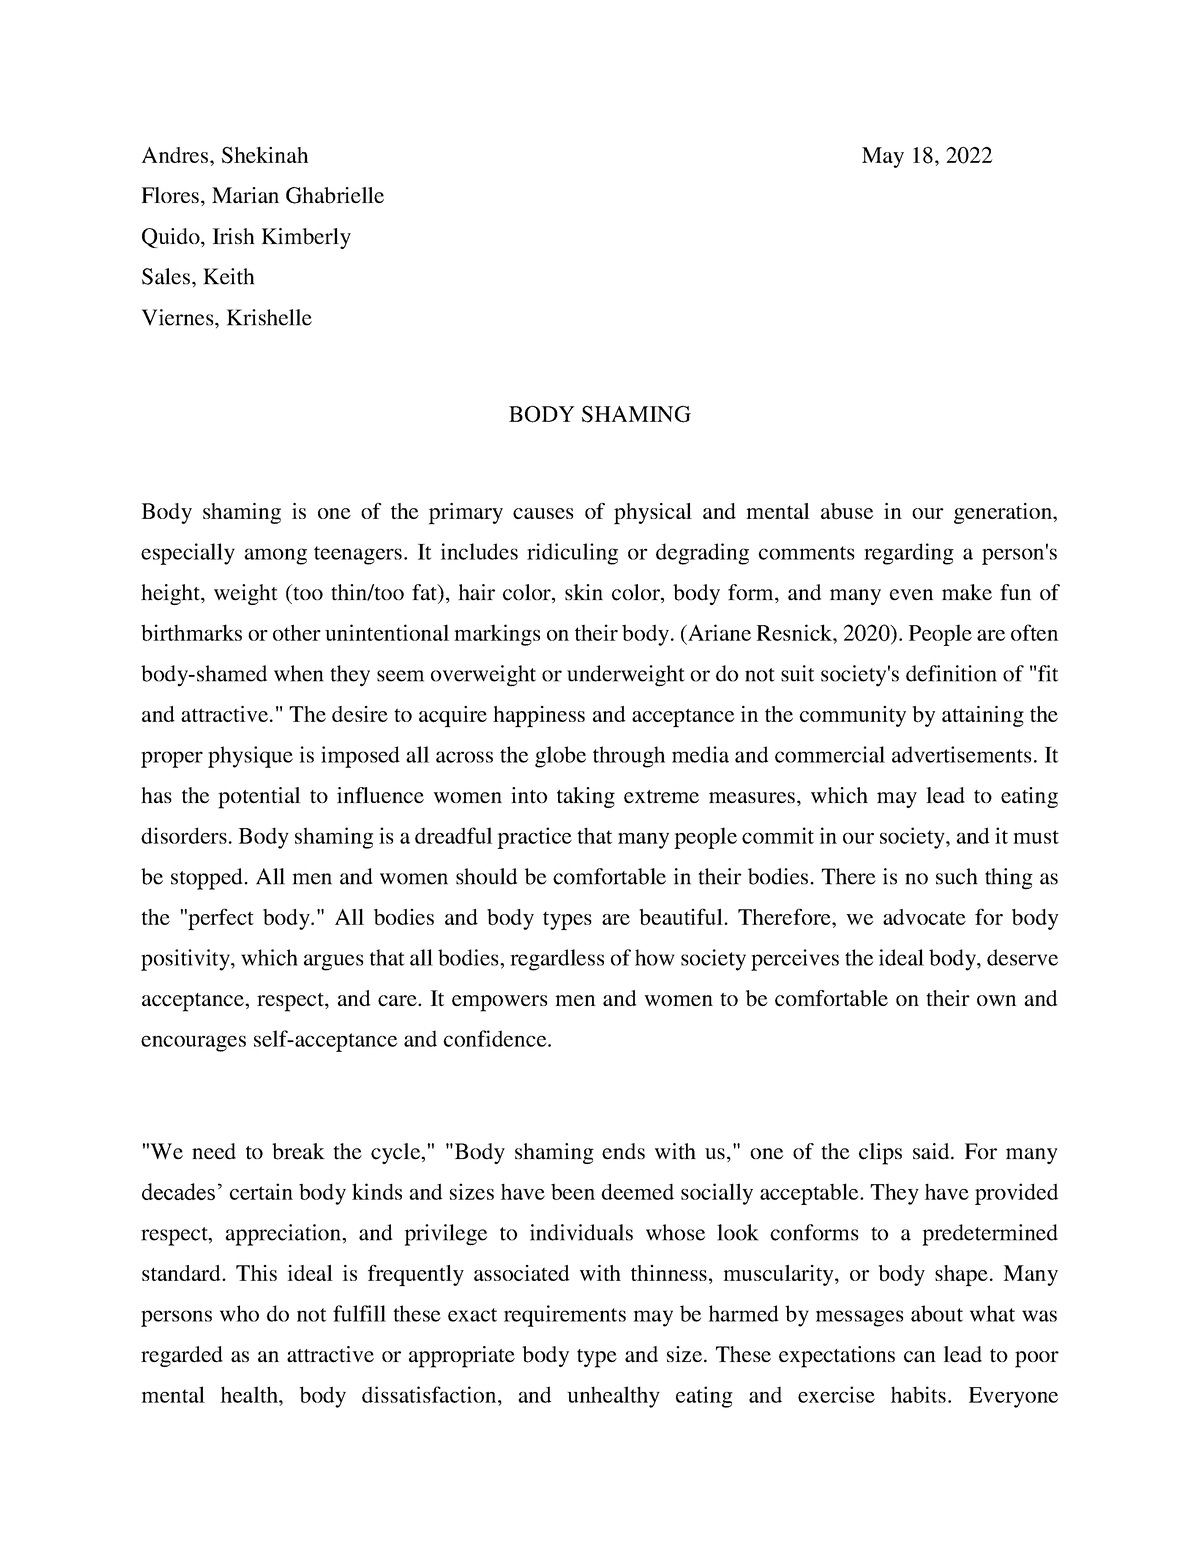 persuasive essay about body shaming